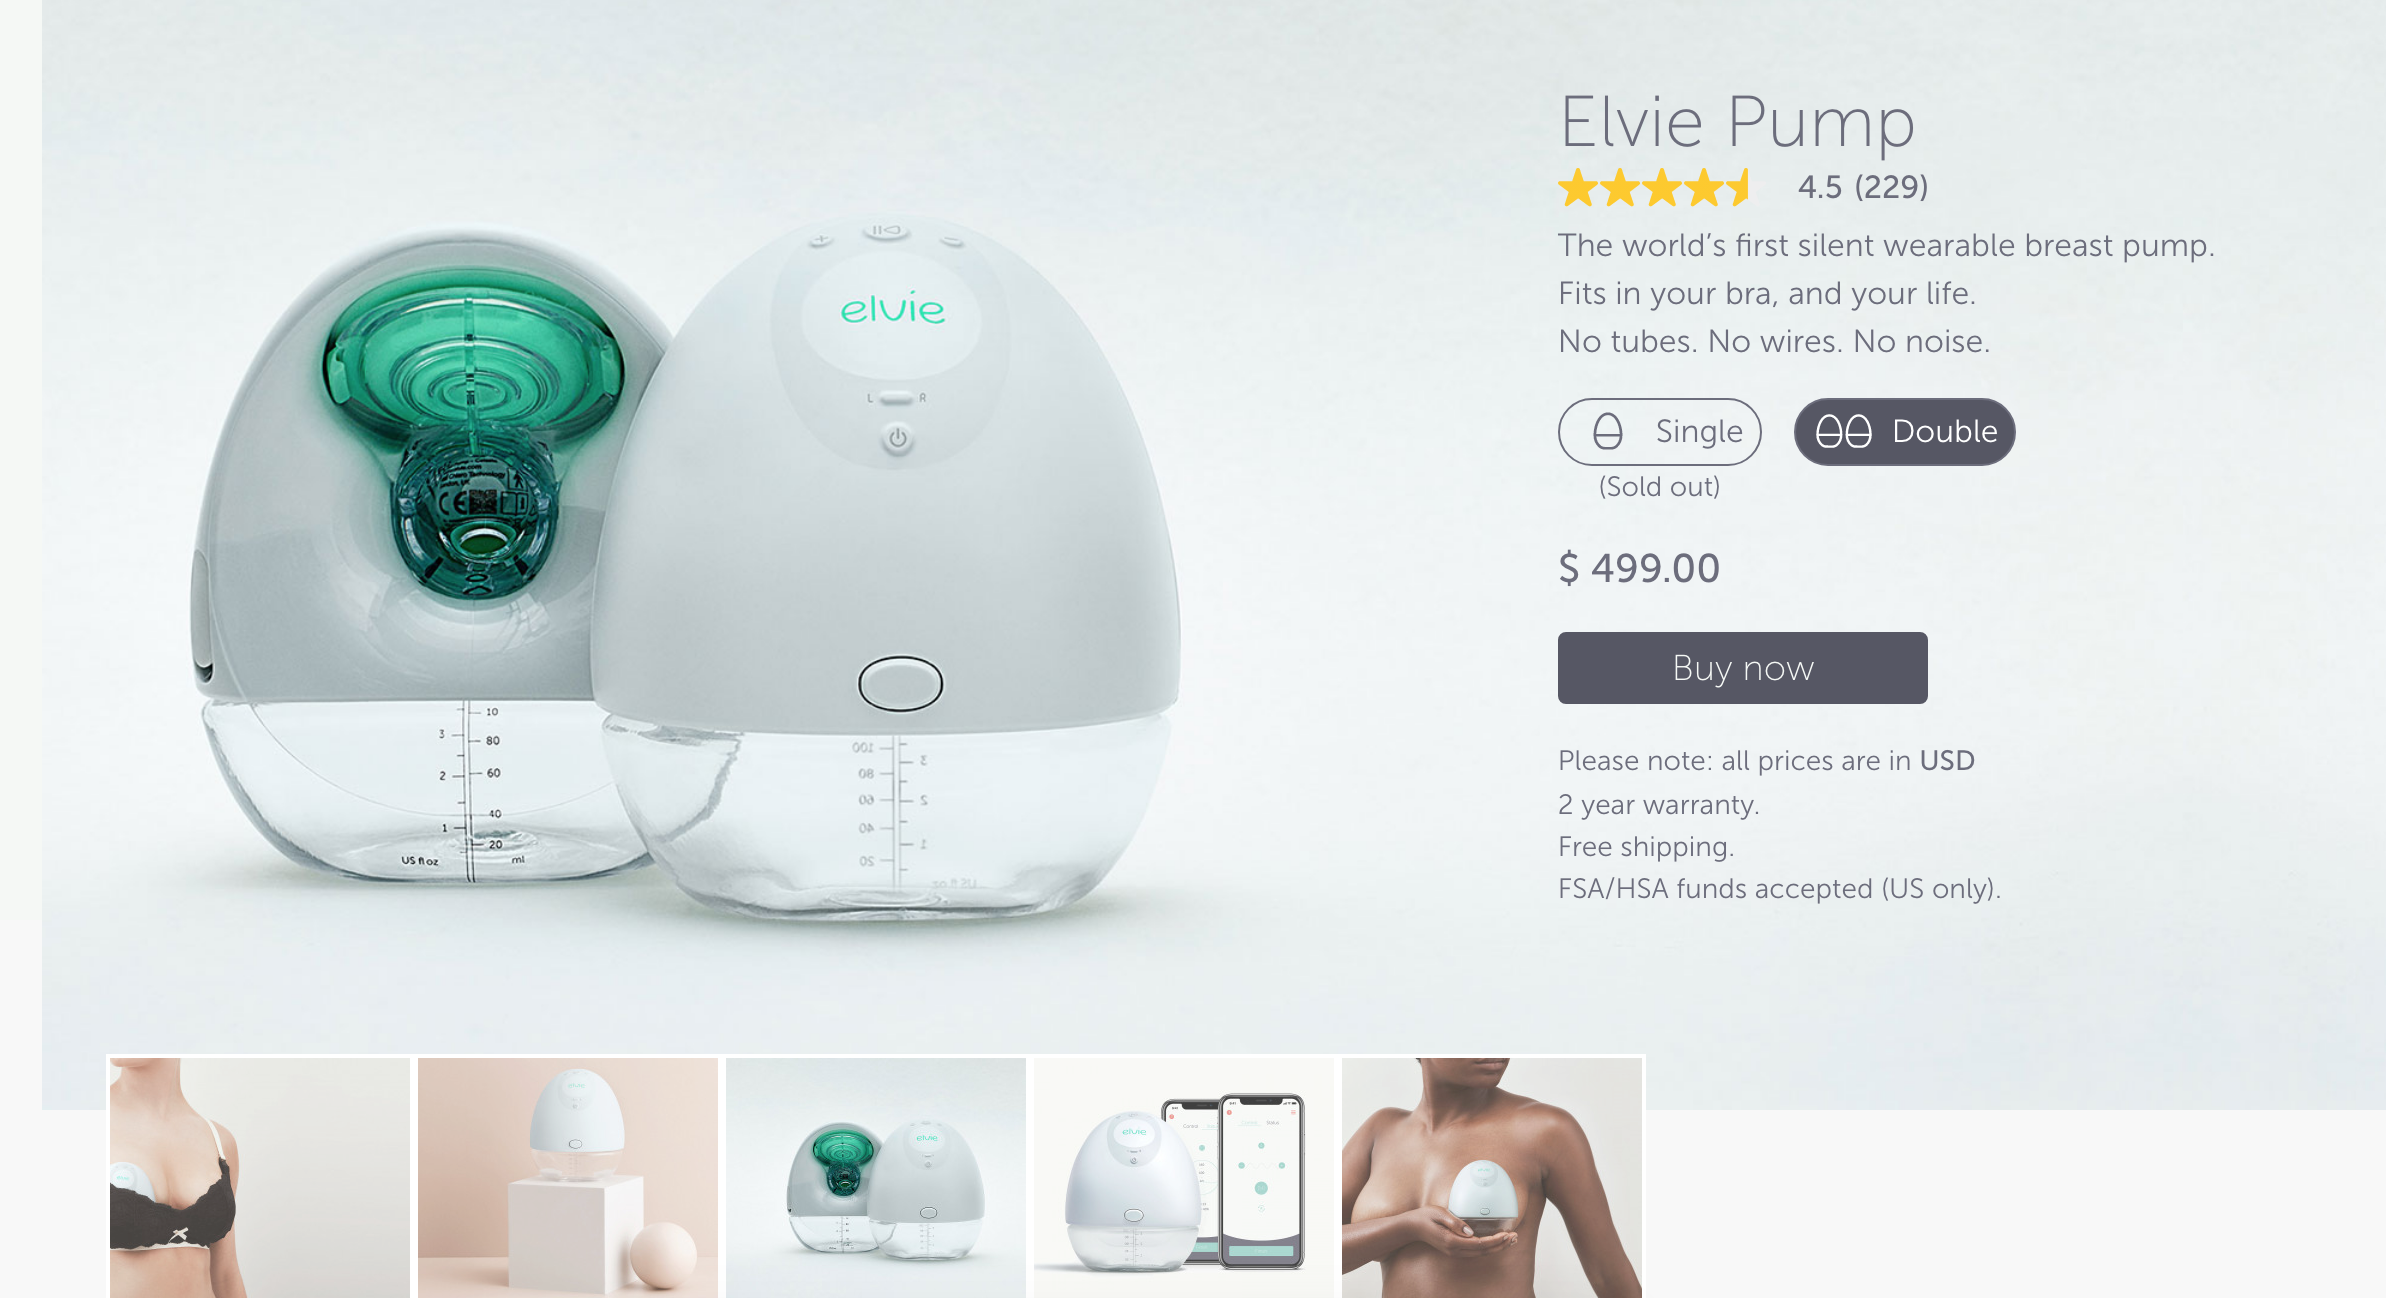 I Tried the Elvie Wearable Breast Pump, Review